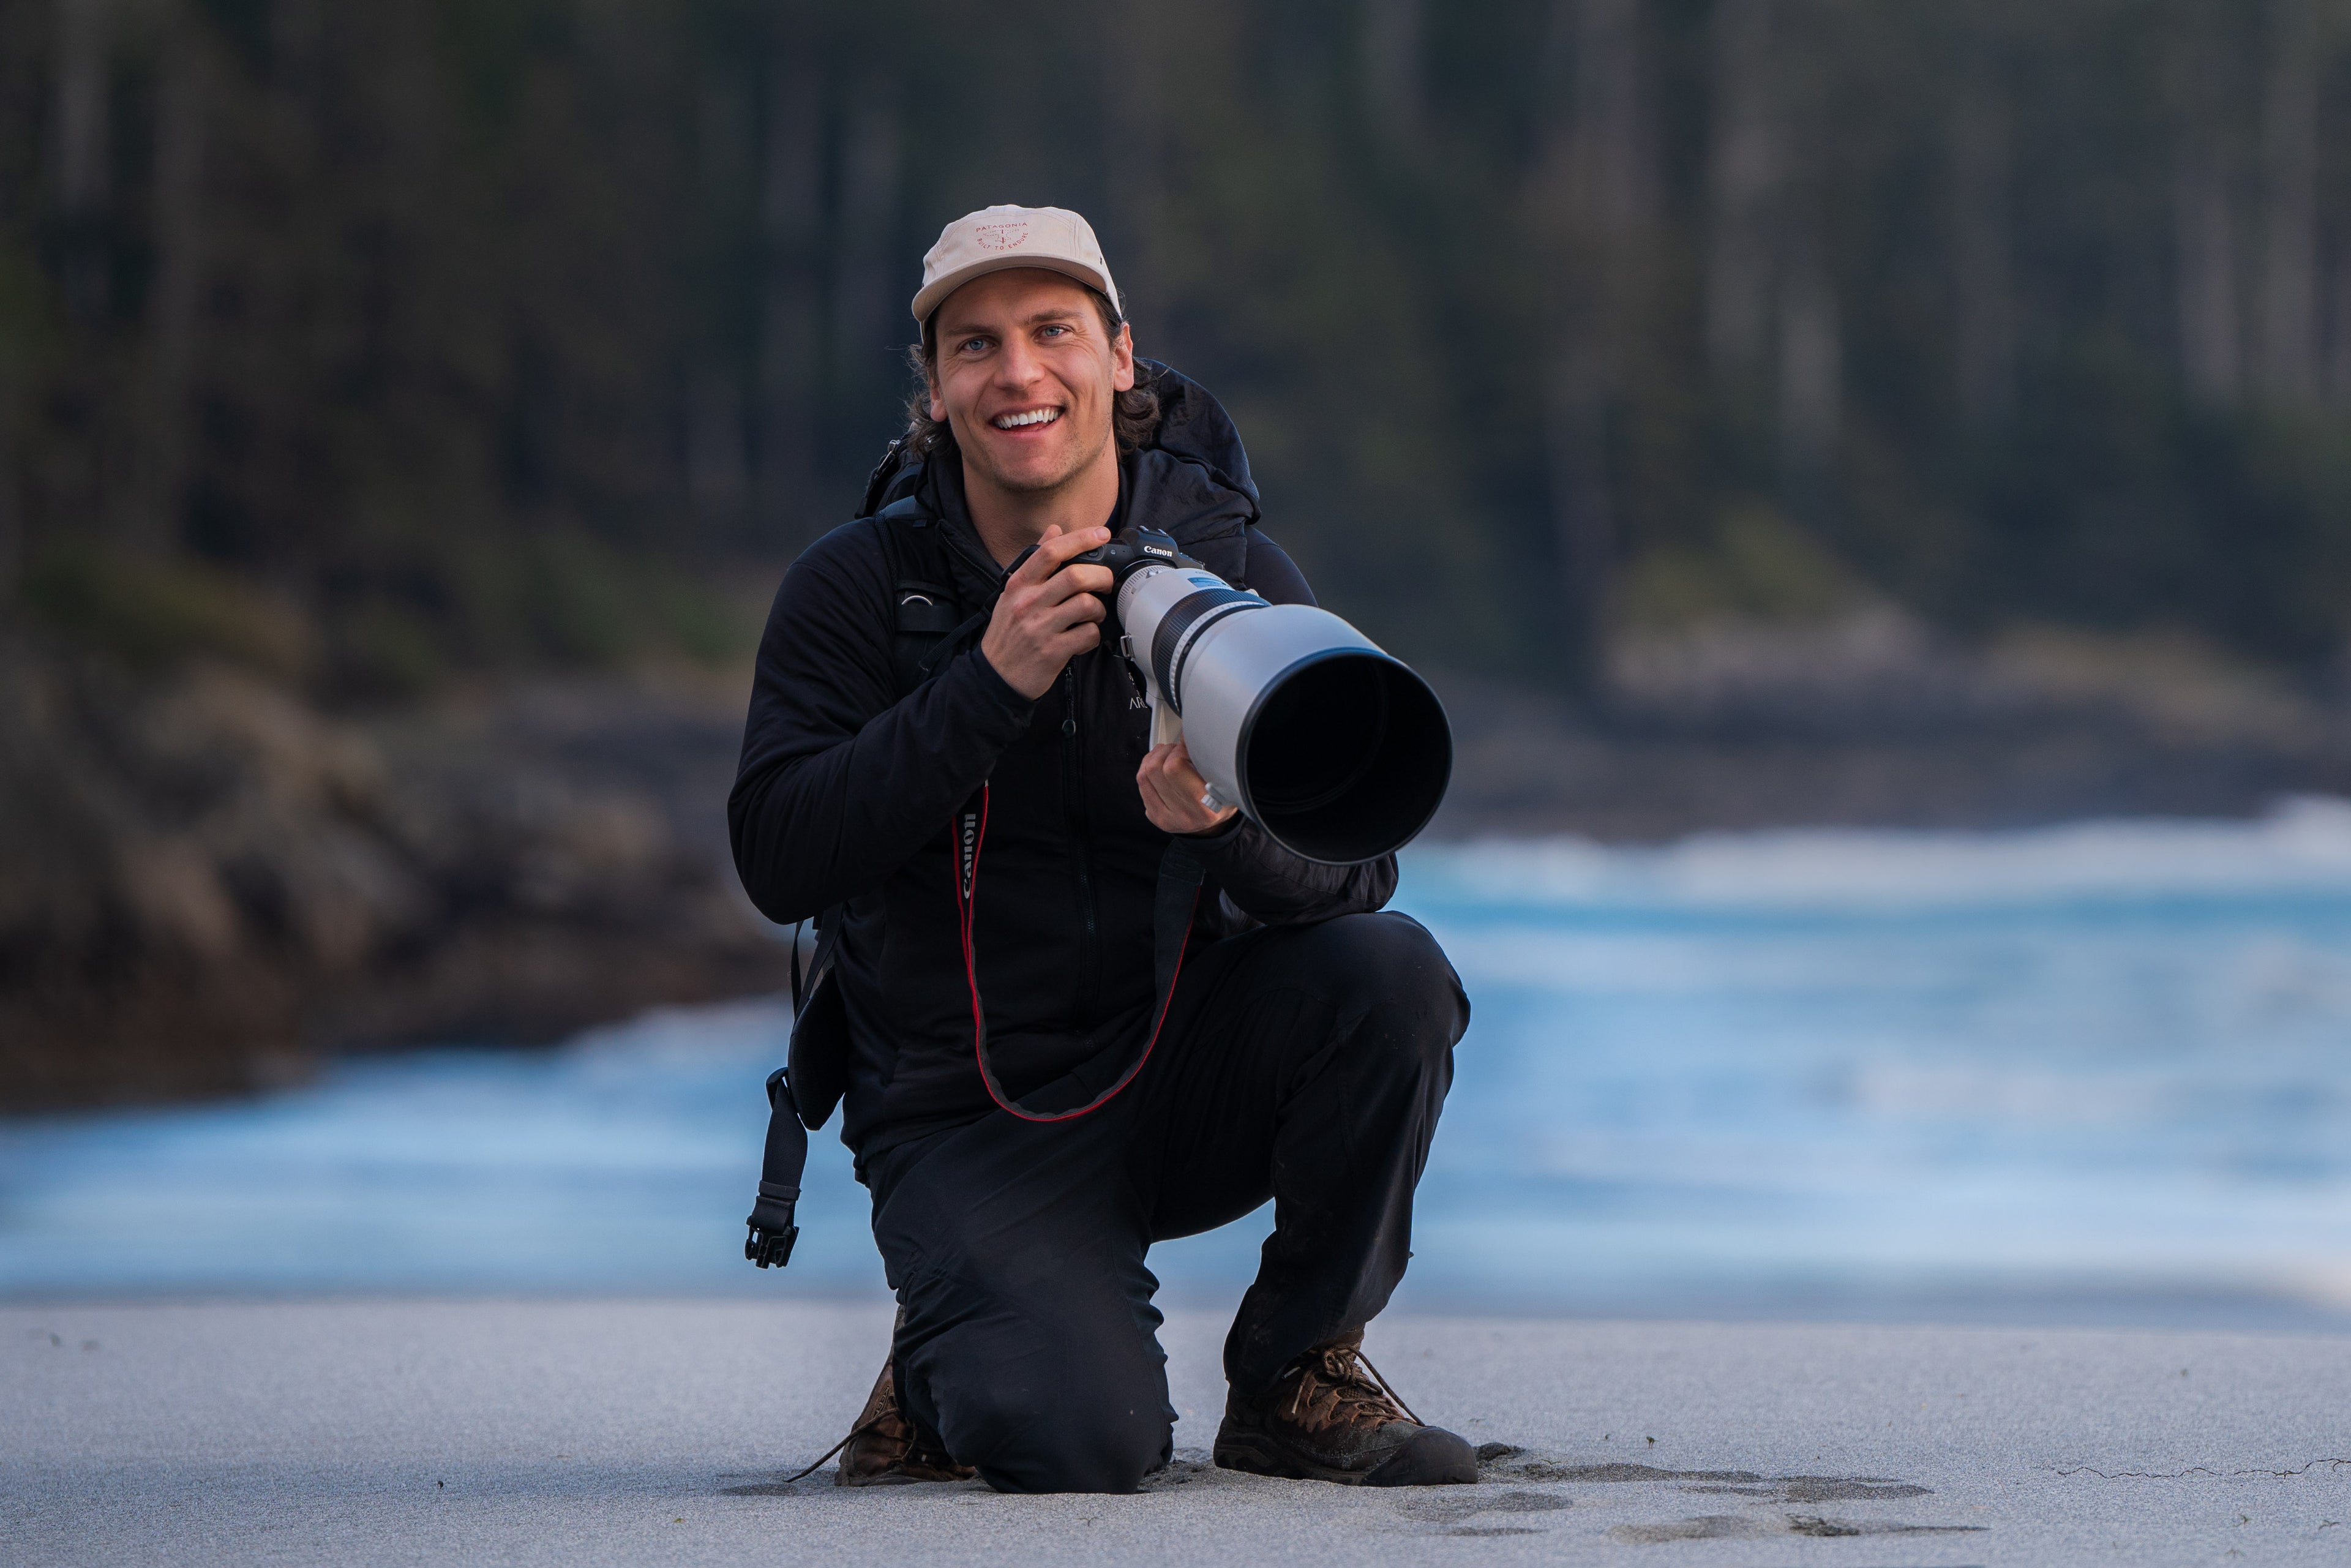 Load video: Chase Teron behind the scenes of ethical wildlife photography